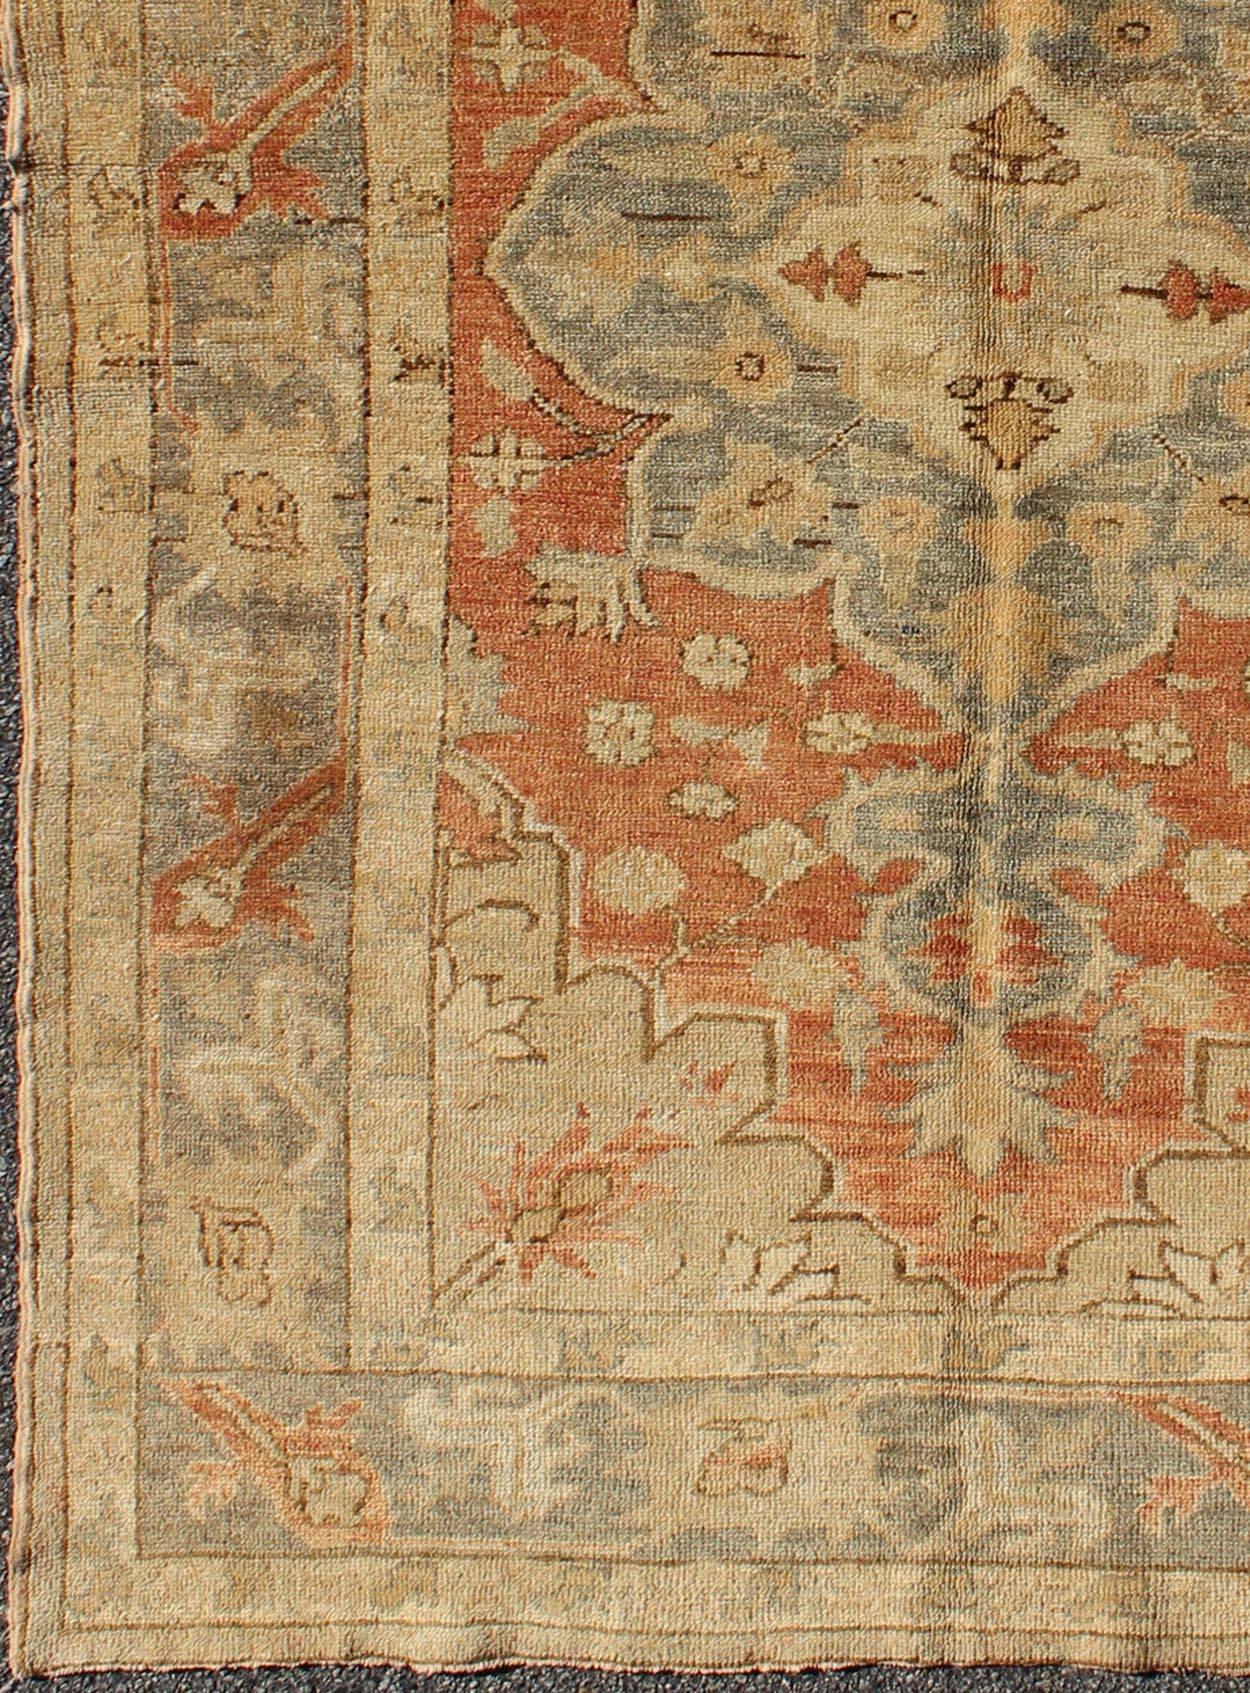 Vintage Turkish Oushak rug with stylized floral motifs in light orange, grey and taupe. Keivan Woven Arts rug NA-54667, country of origin / type: Turkey / Oushak, circa 1930's

This 1930's Turkish Oushak carpet features a central medallion design,